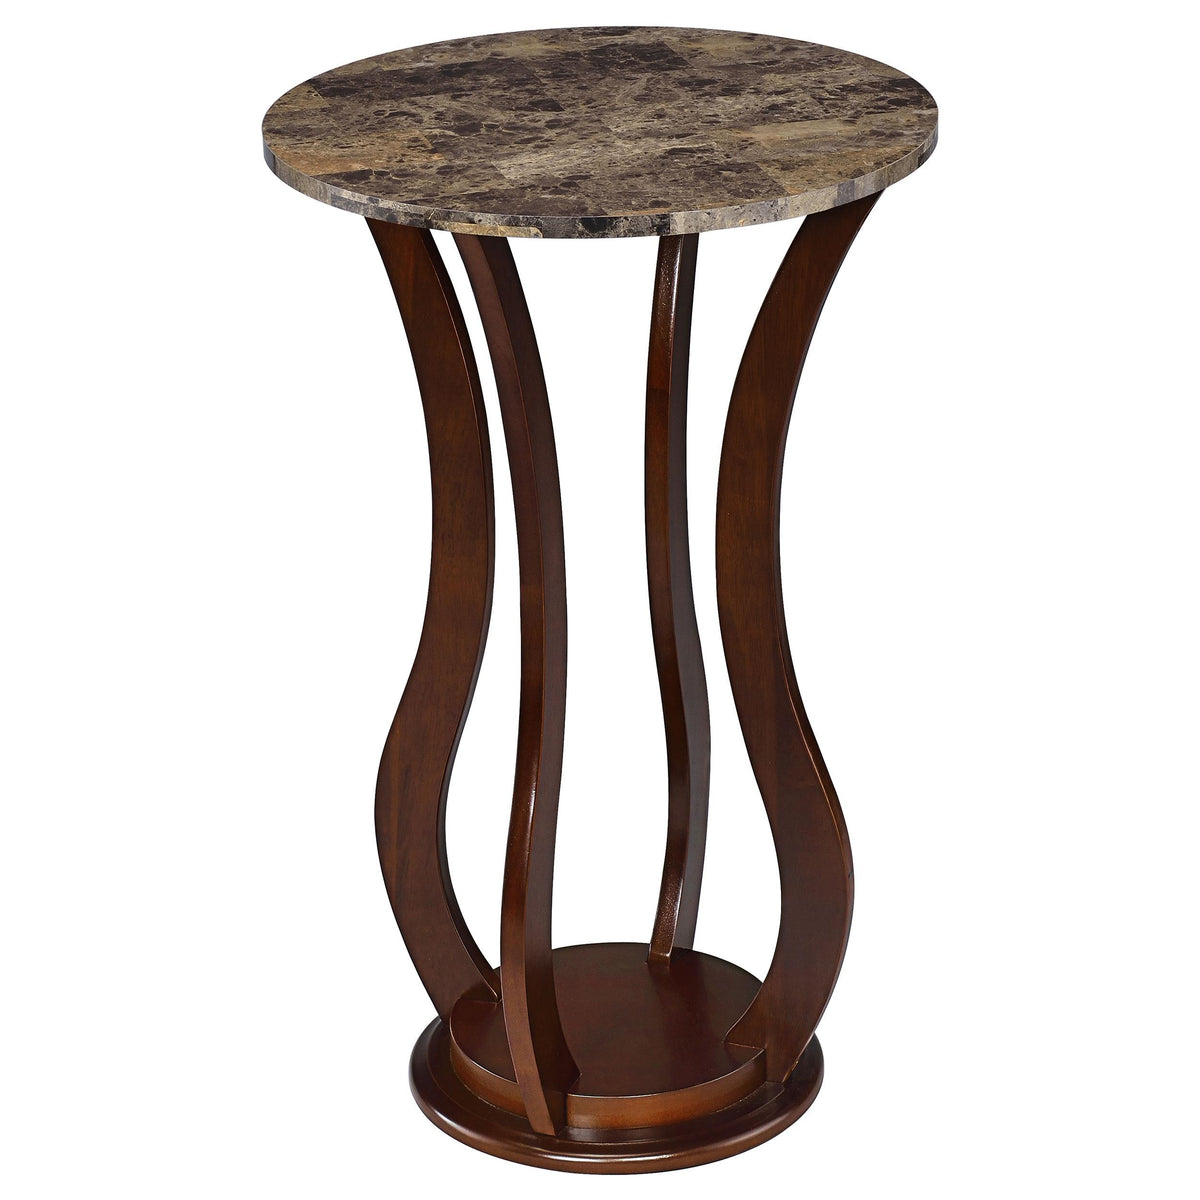 Elton Round Marble Top Accent Table Brown Elton Round Marble Top Accent Table Brown Half Price Furniture